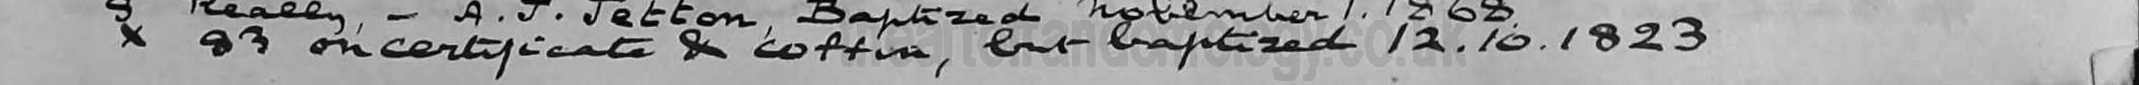 Mary Ann Messingham burial 1903 | Footnote